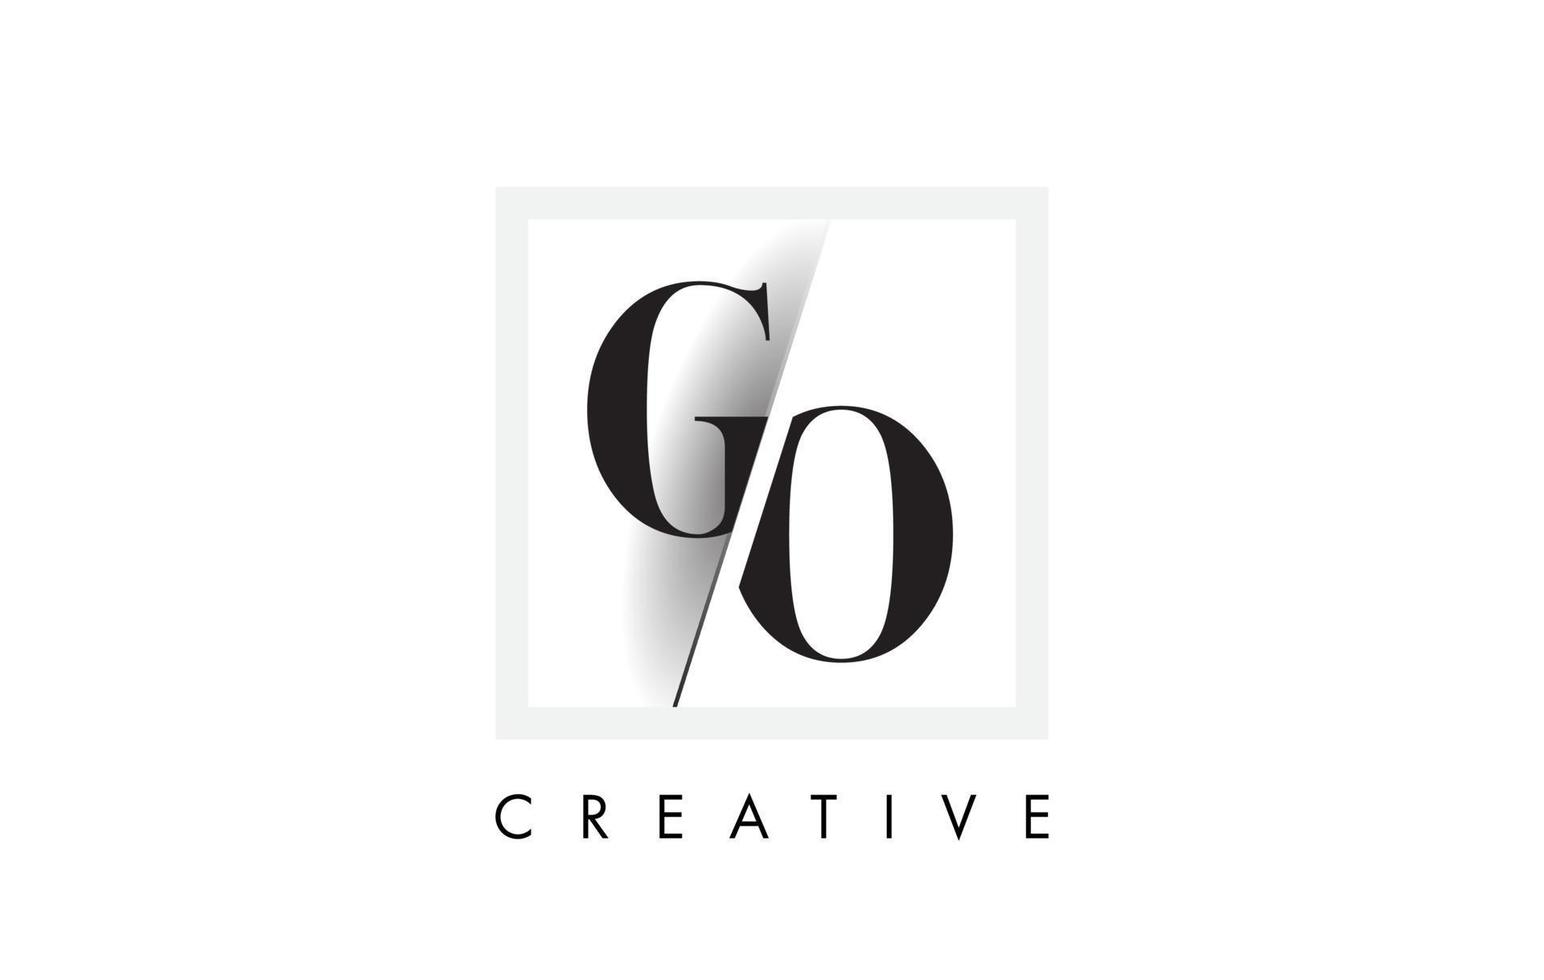 GO Serif Letter Logo Design with Creative Intersected Cut. vector